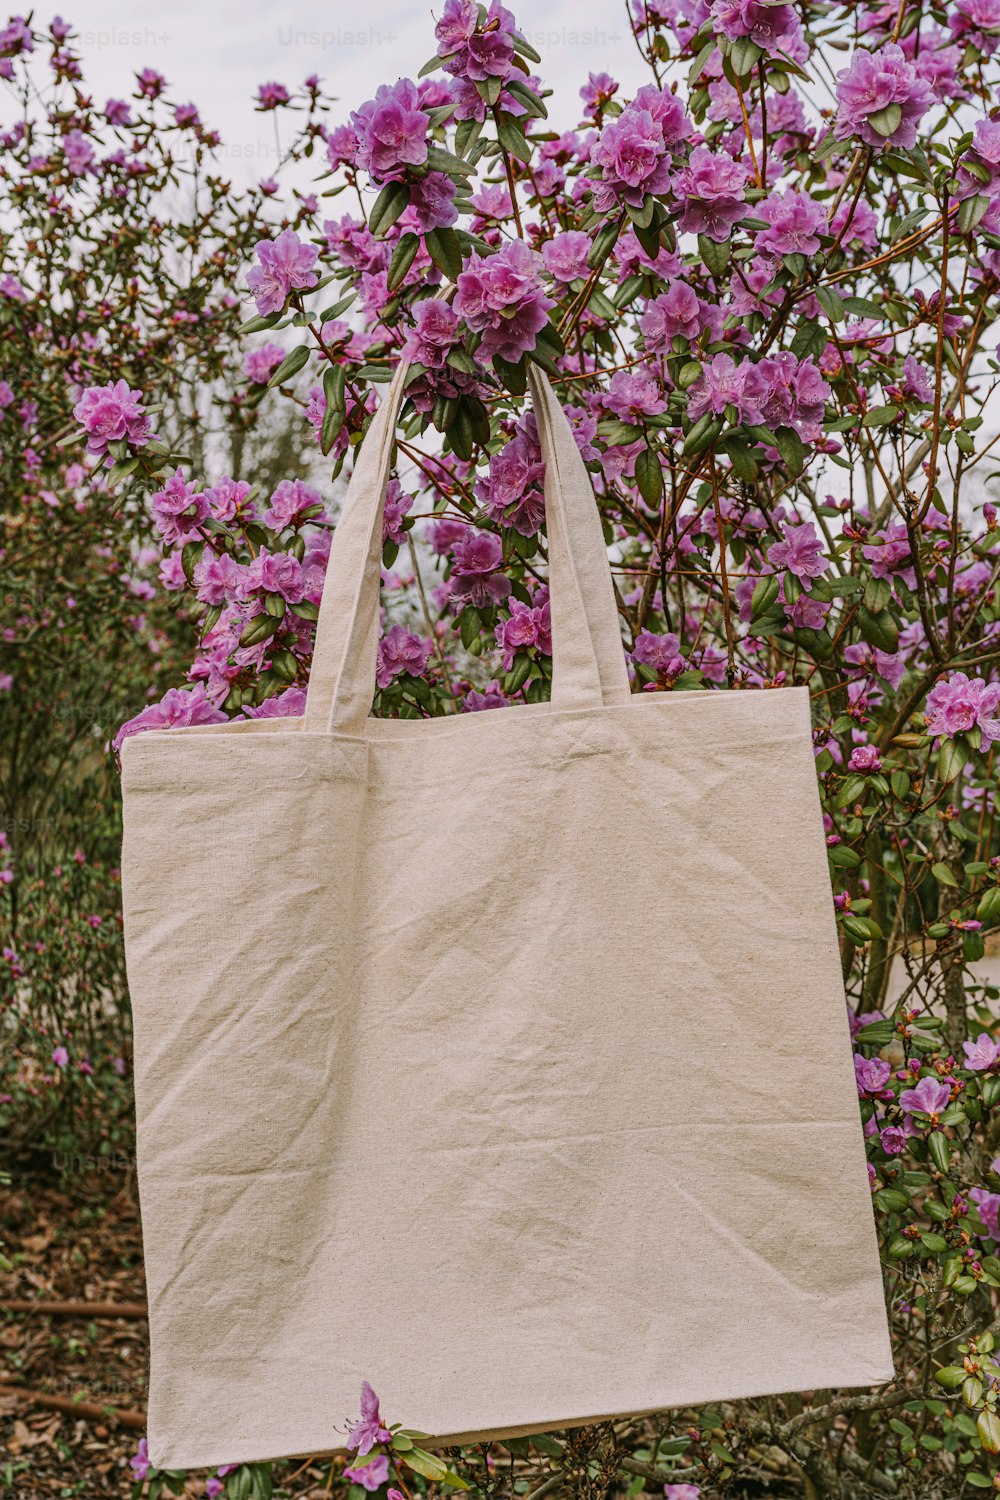 a white bag hanging from a tree filled with purple flowers